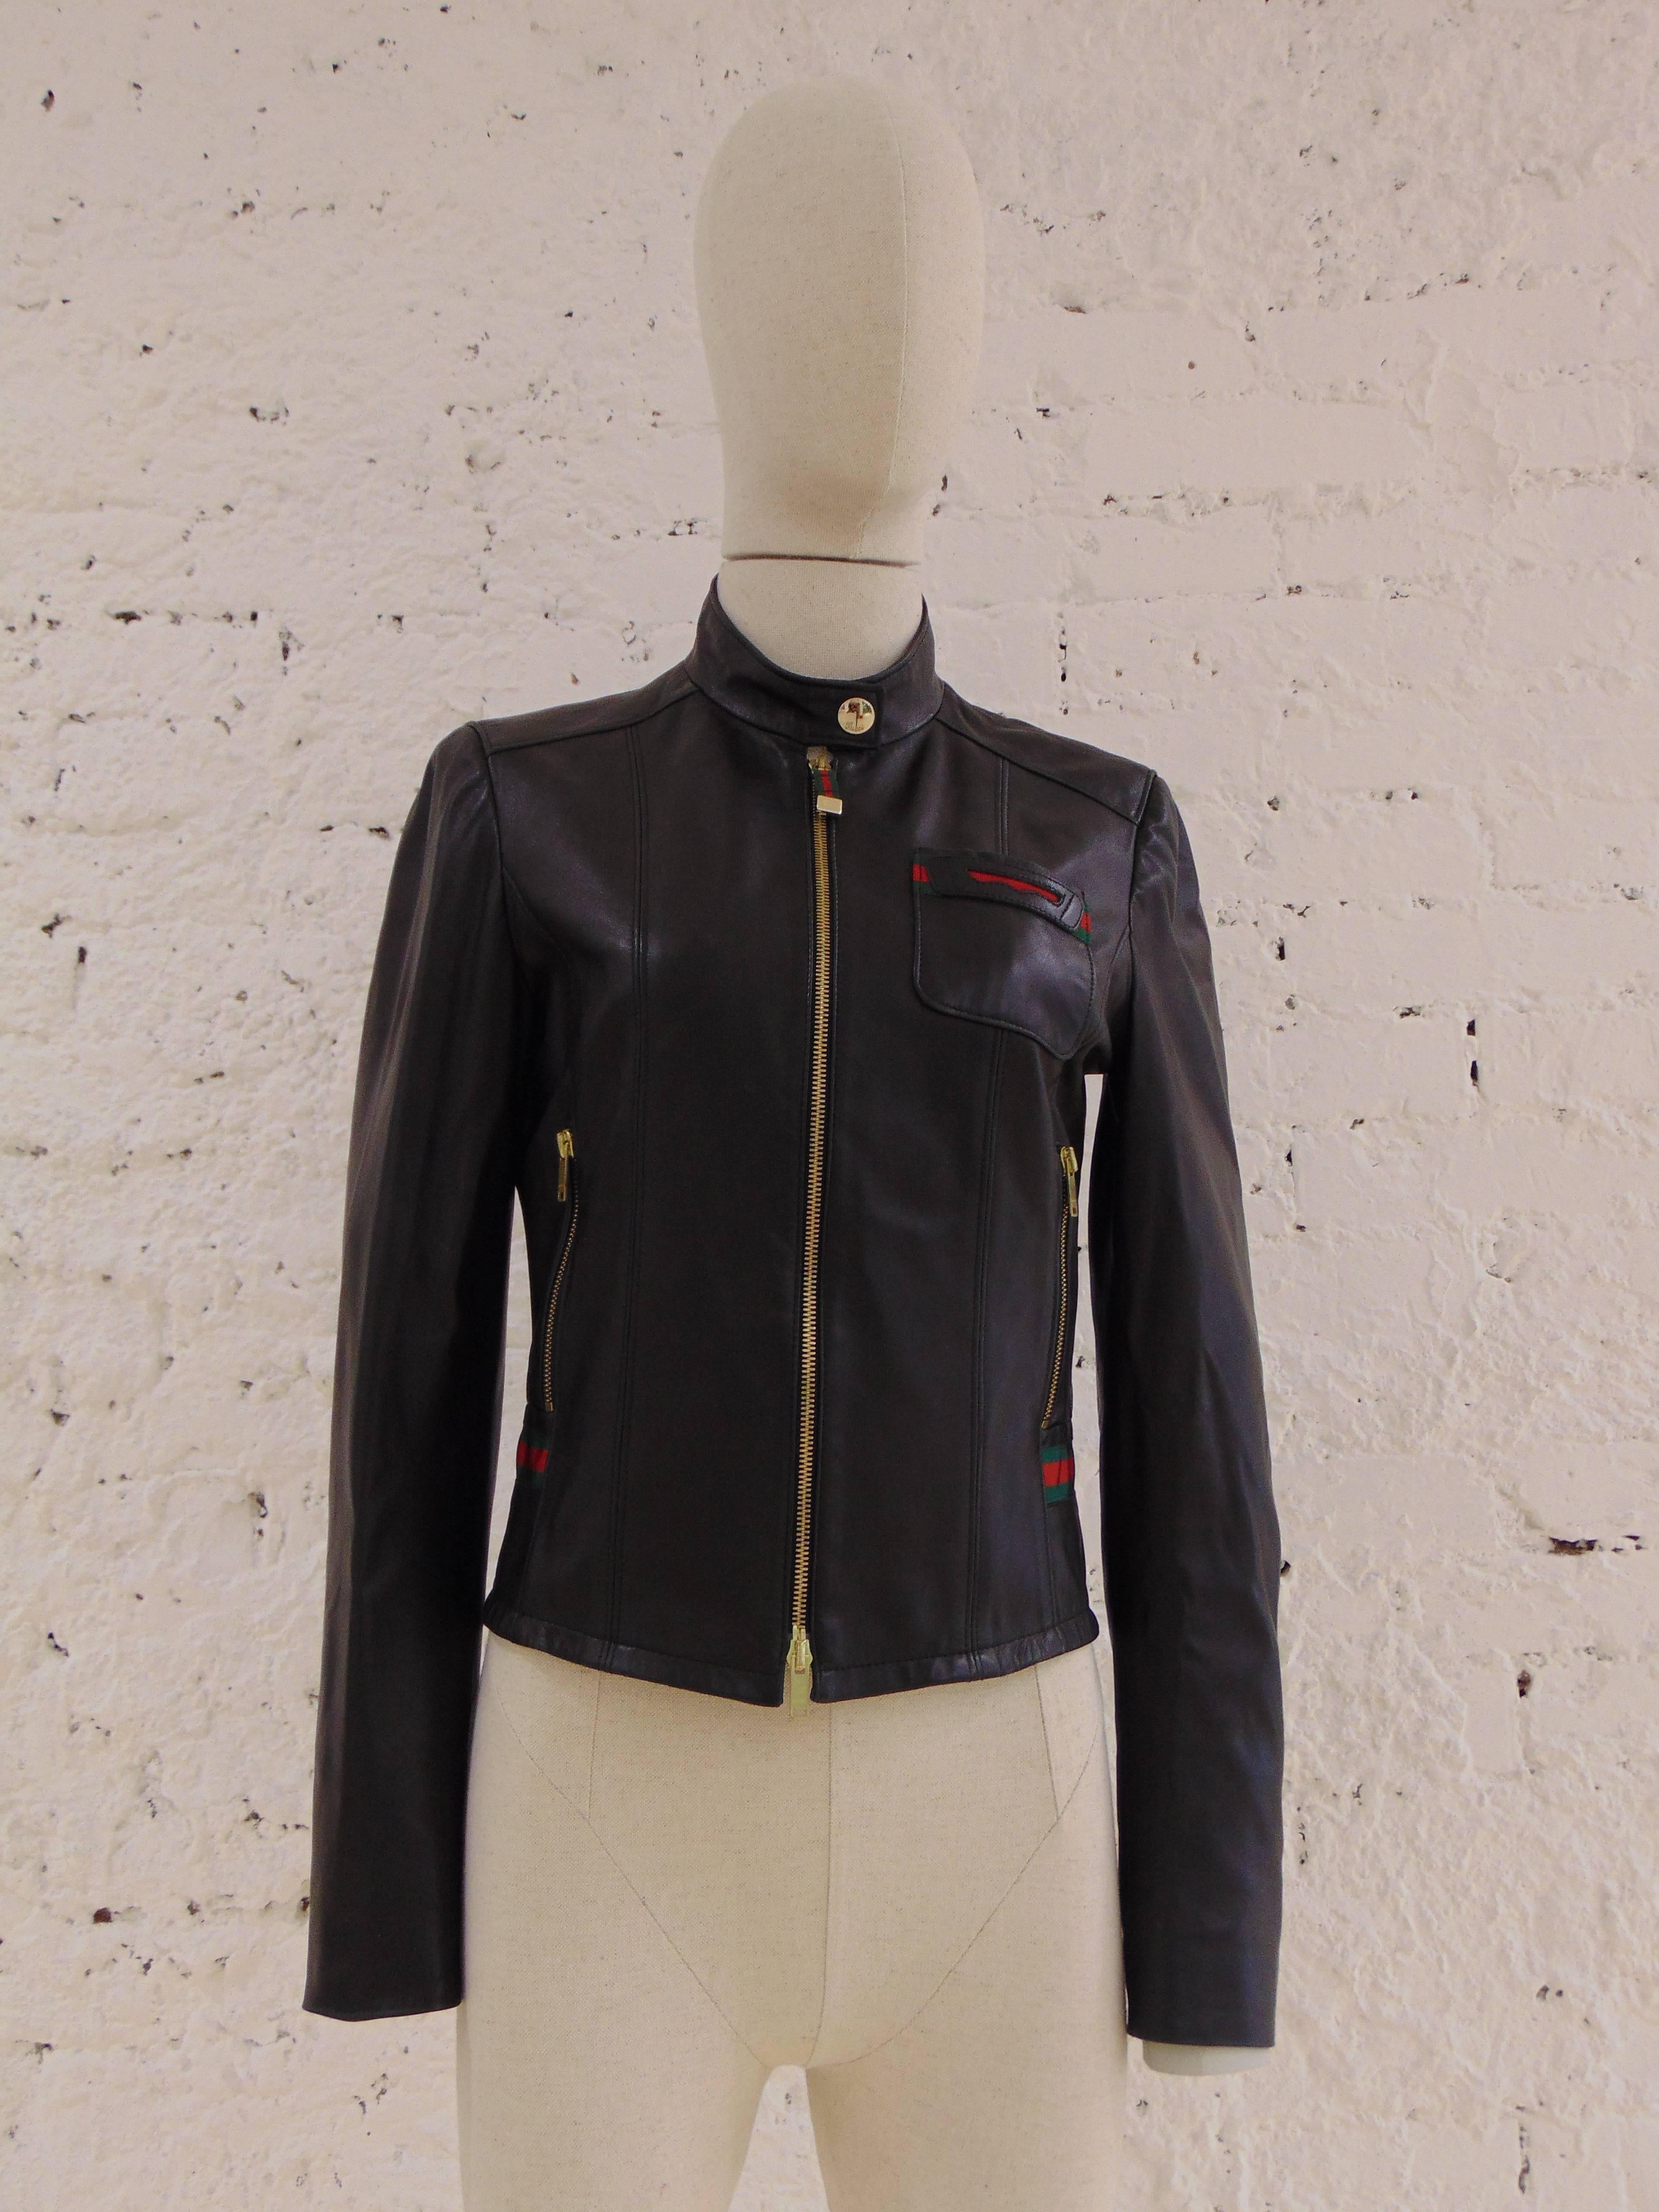 Gucci by Tom Ford black leather jacket
totally made in italy with gold tone hardware 
